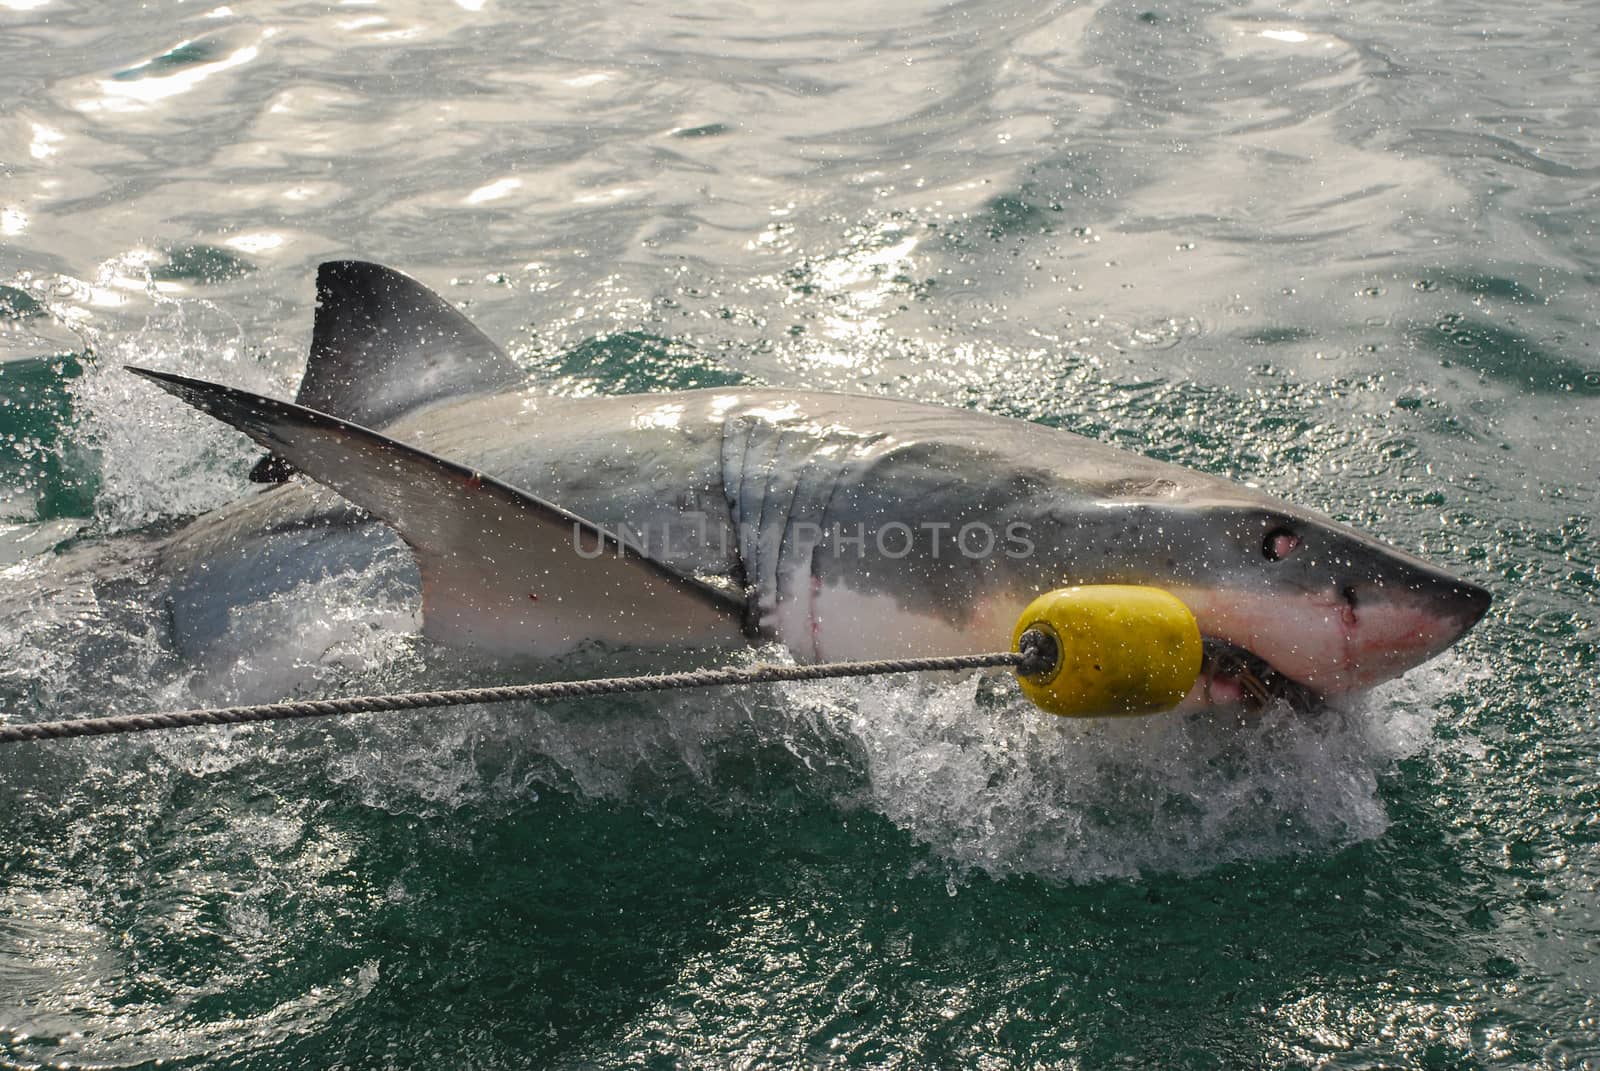 A great white shark bites into the bait from a cge diving boat in Gansbaai, South Africa